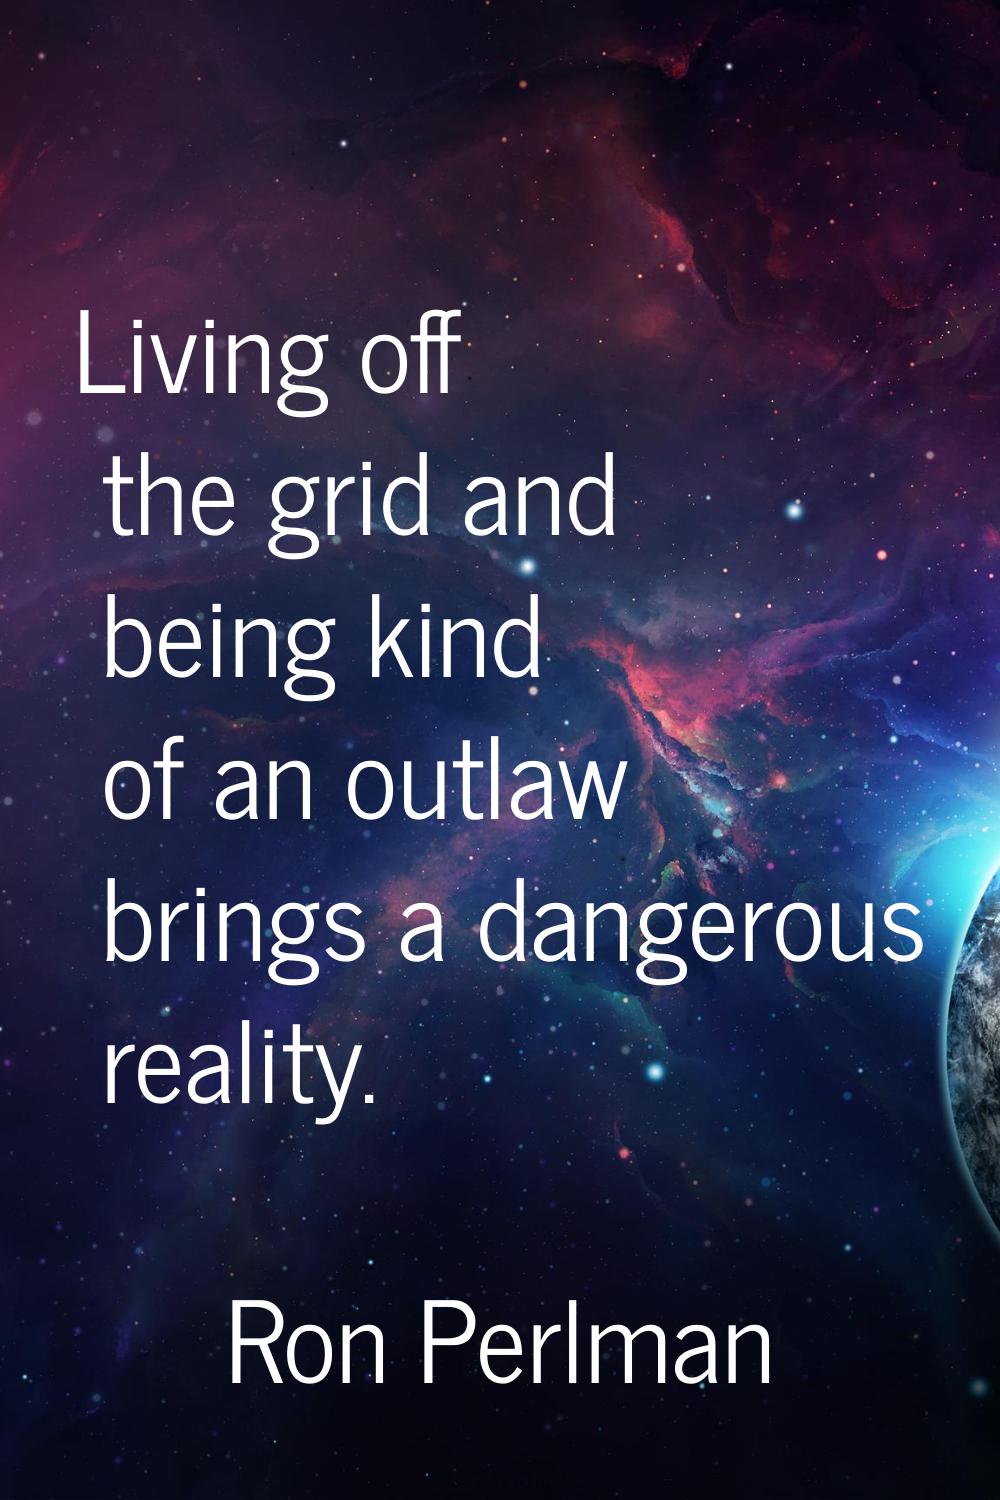 Living off the grid and being kind of an outlaw brings a dangerous reality.